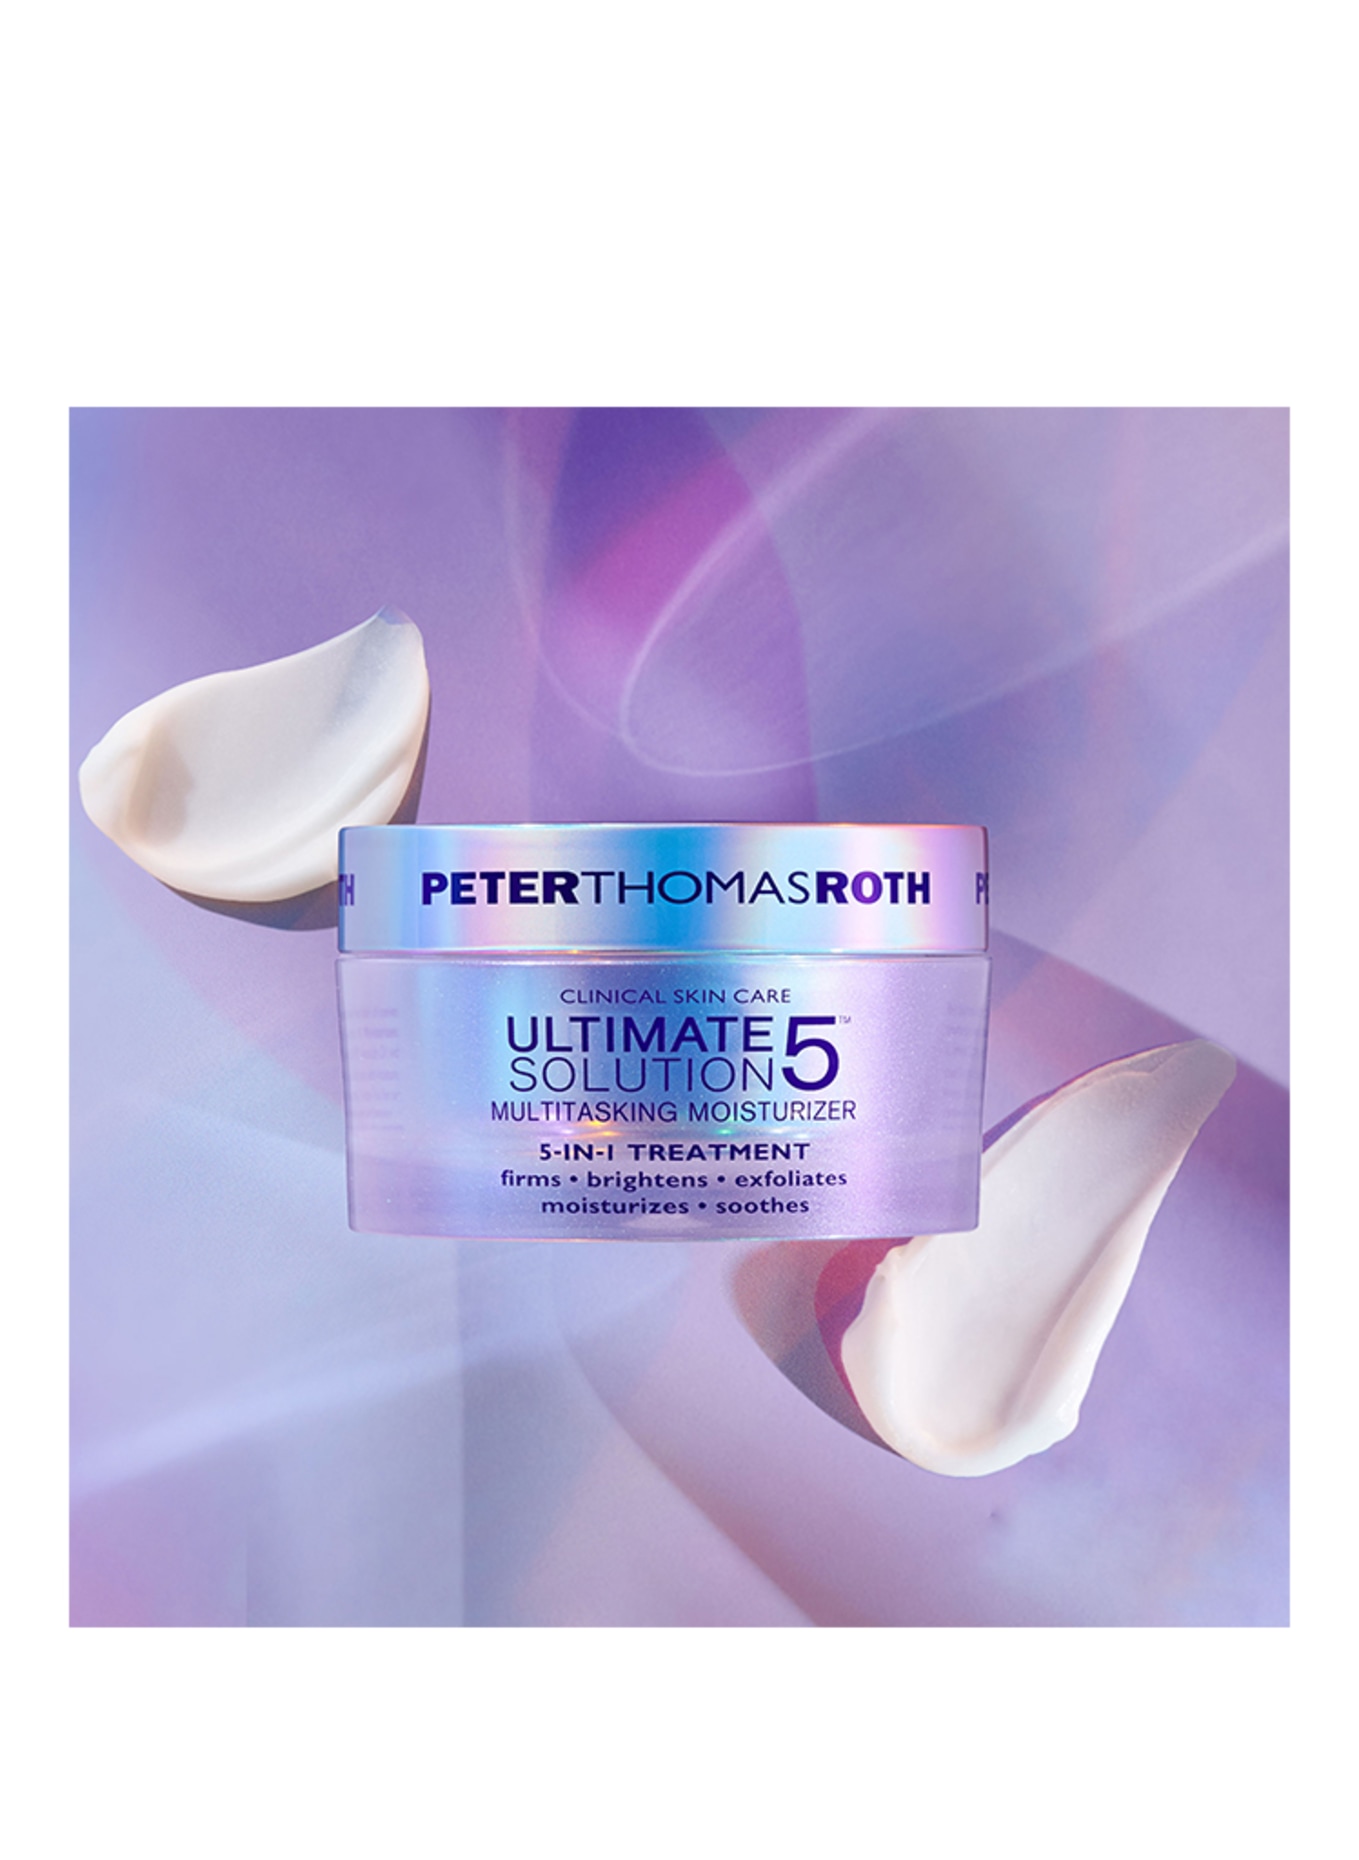 PETER THOMAS ROTH ULTIMATE SOLUTION 5 (Obrázek 2)